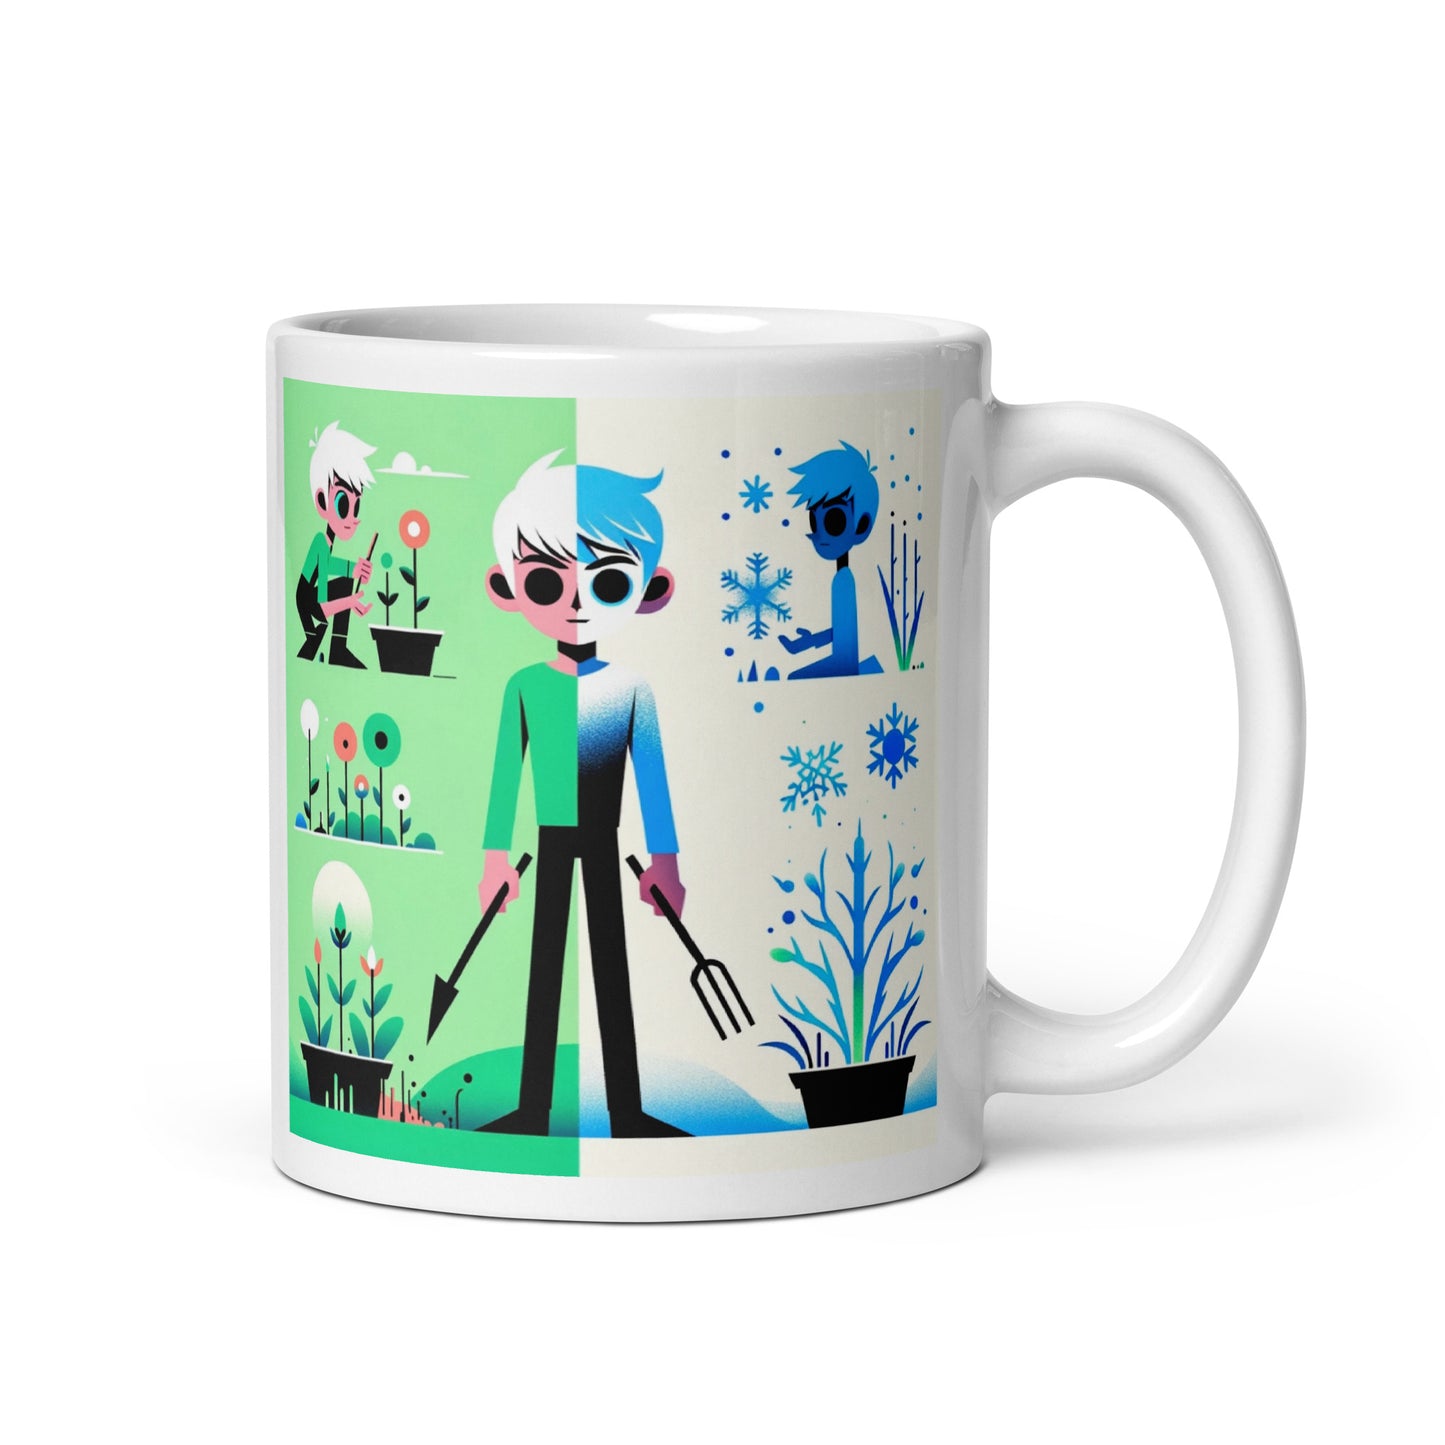 Jack Frost's Winter Garden: Cultivating Christmas Joy with Magical Plants White glossy mug